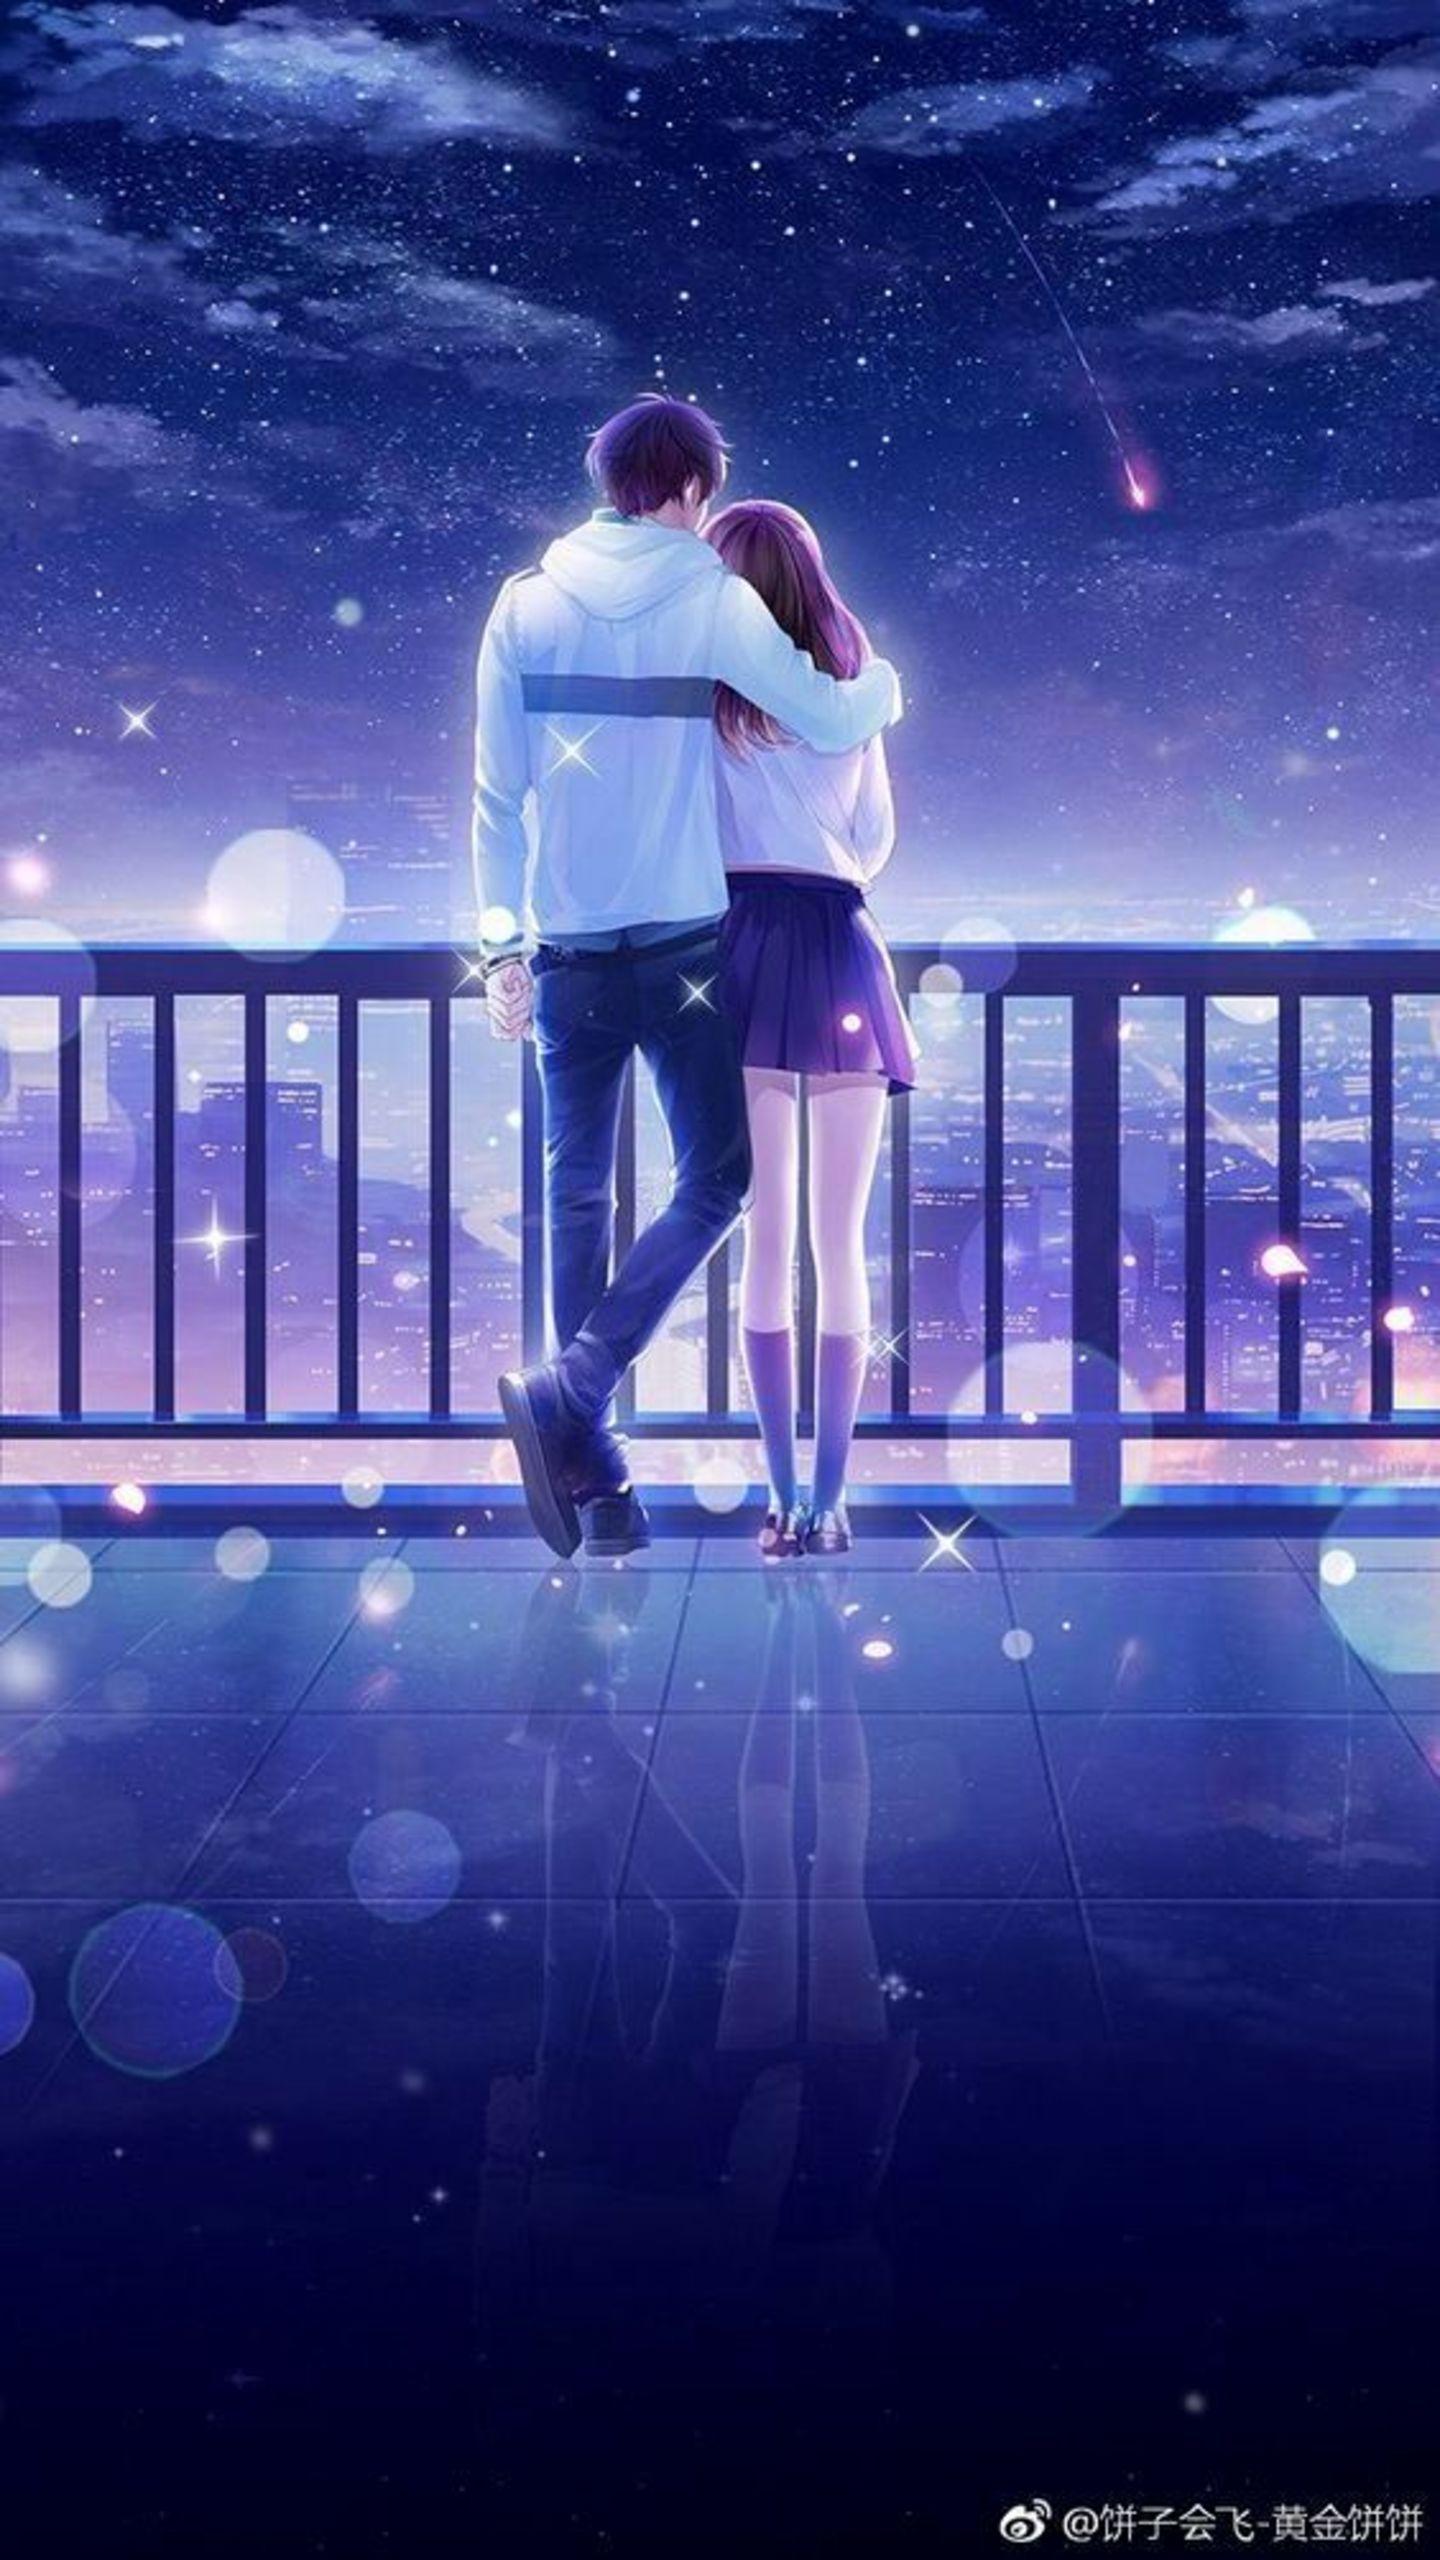 Anime Love Couple Wallpaper For Android